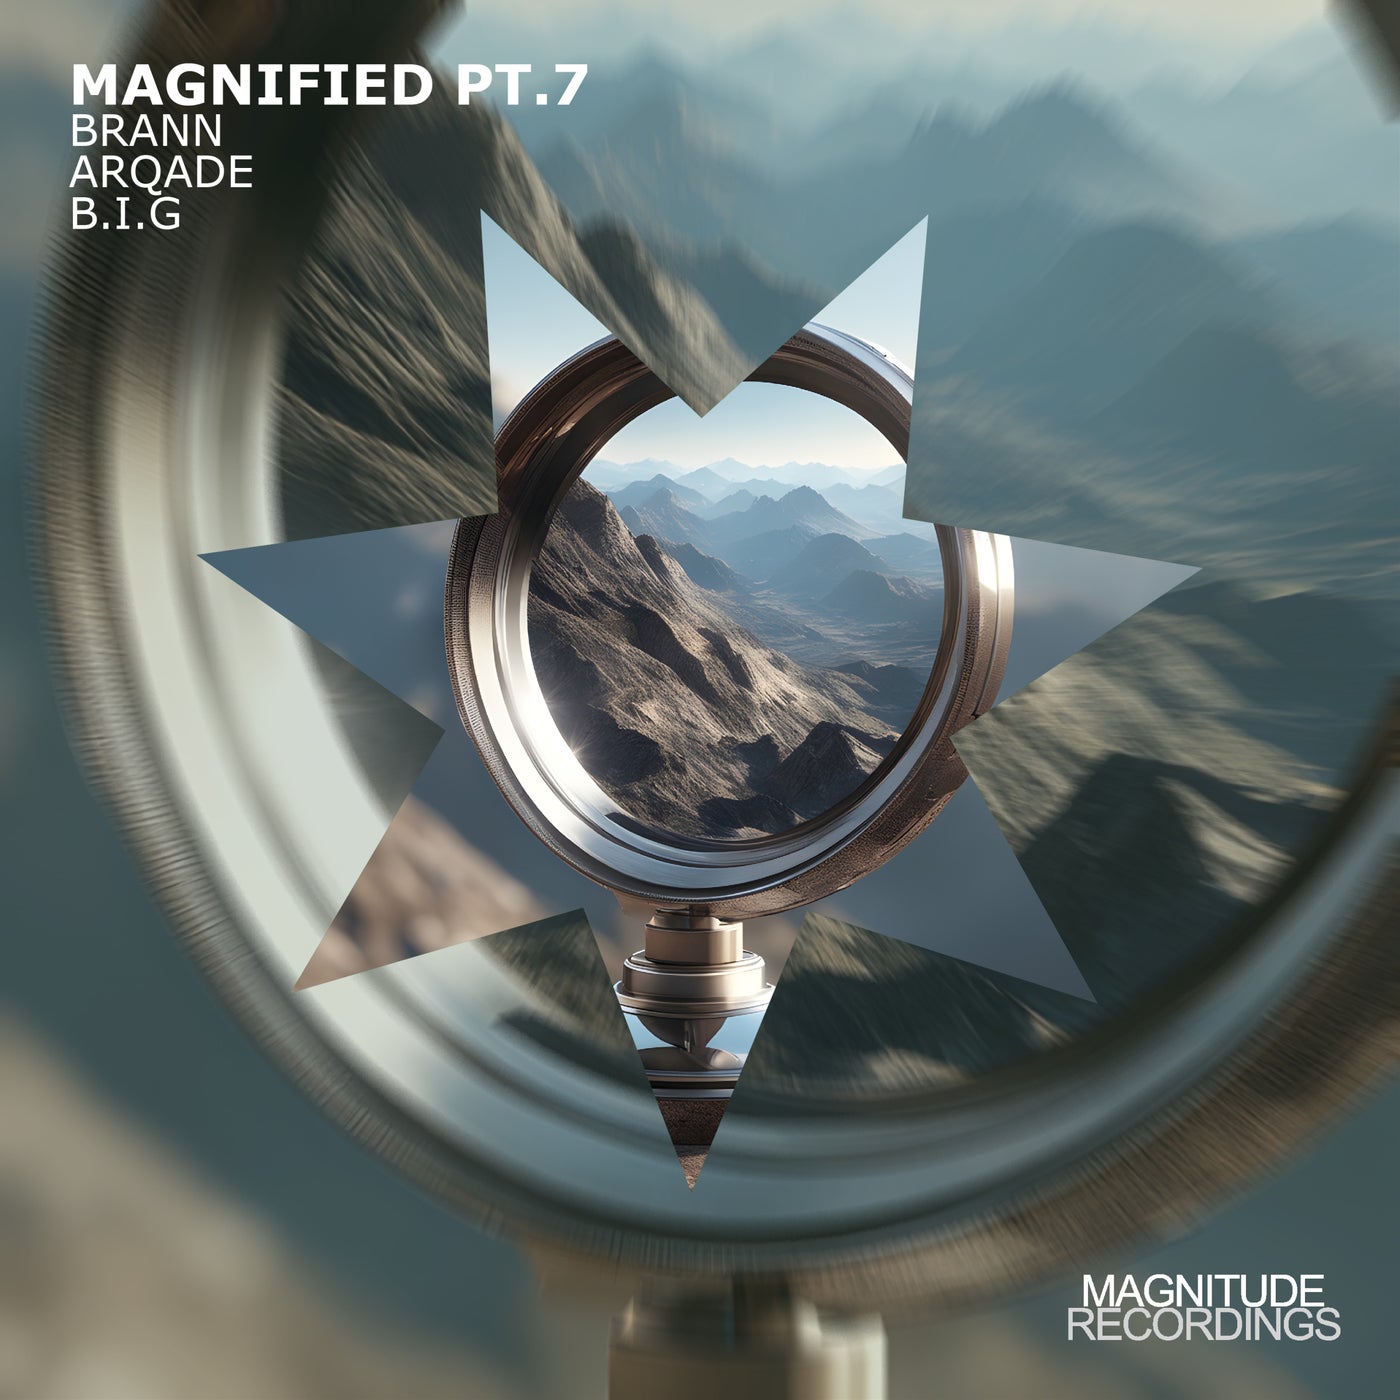 Magnified Pt. 7